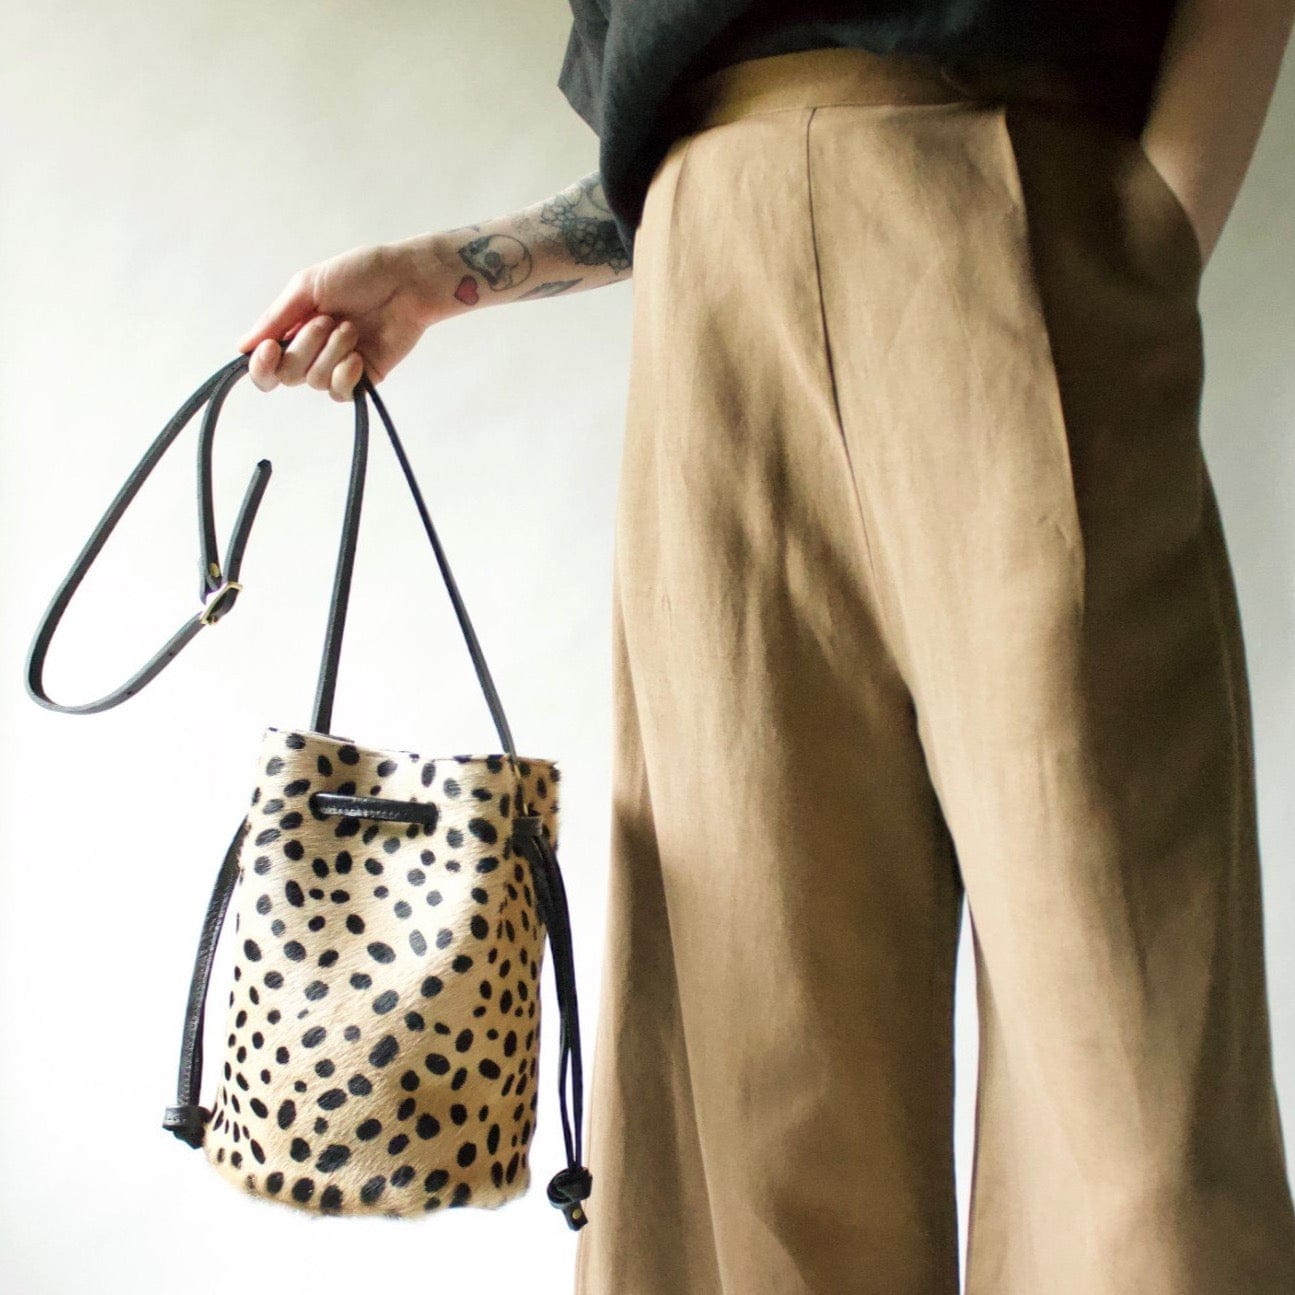 BAG The Ana Bucket in Cheetah with Black